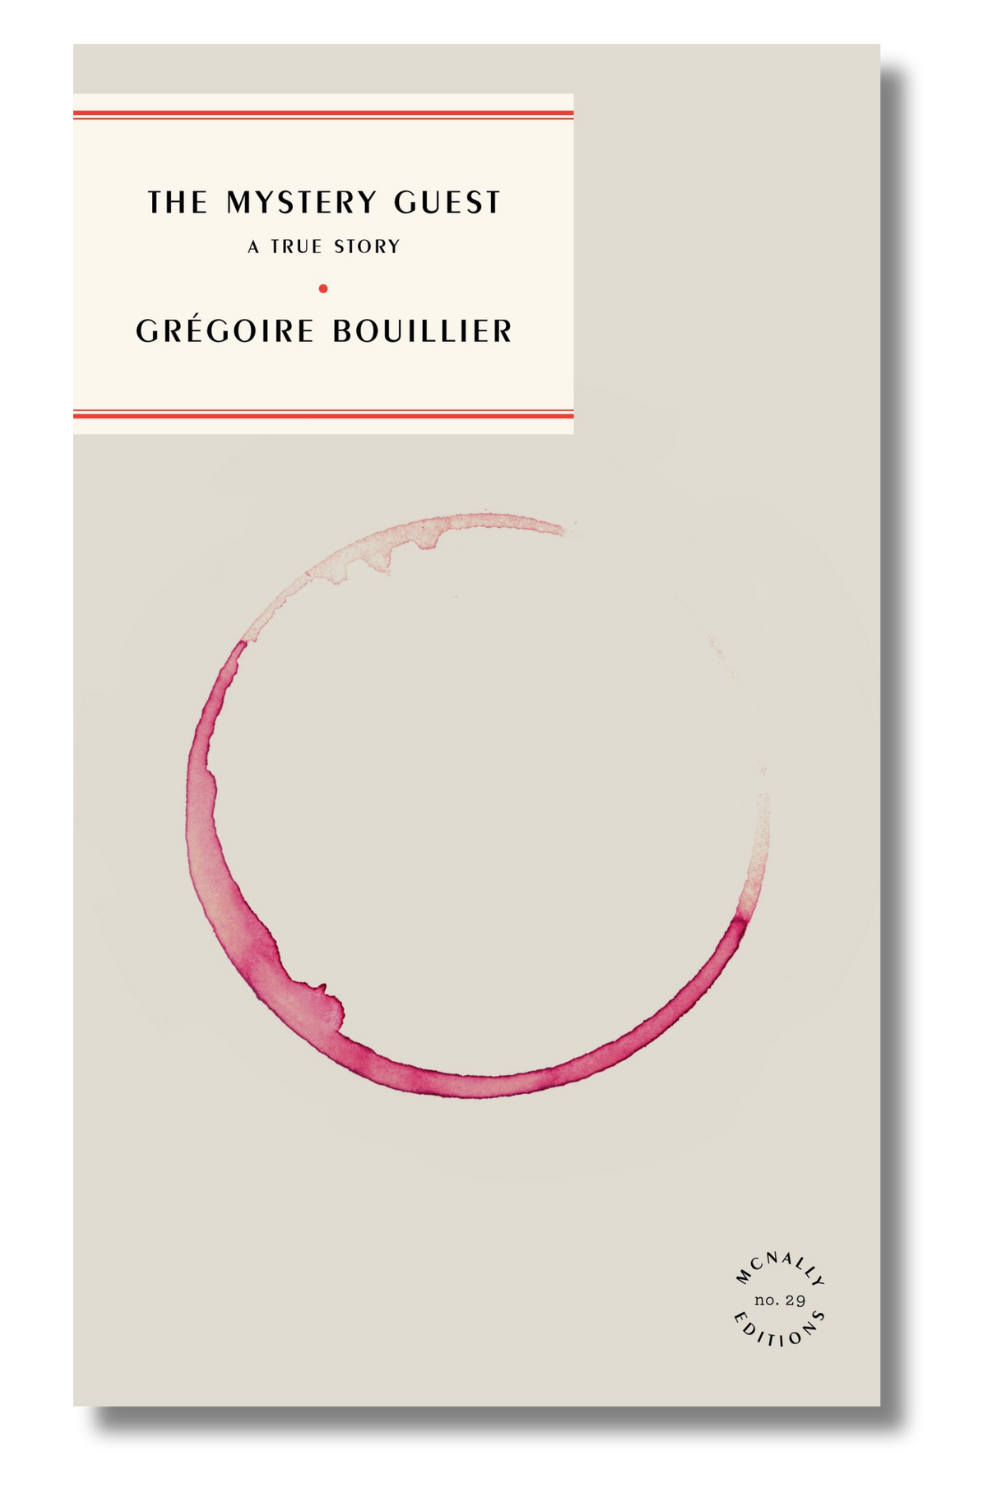 The cover of "The Mystery Guest" by Grégoire Bouillier, tr. by Ben Truman